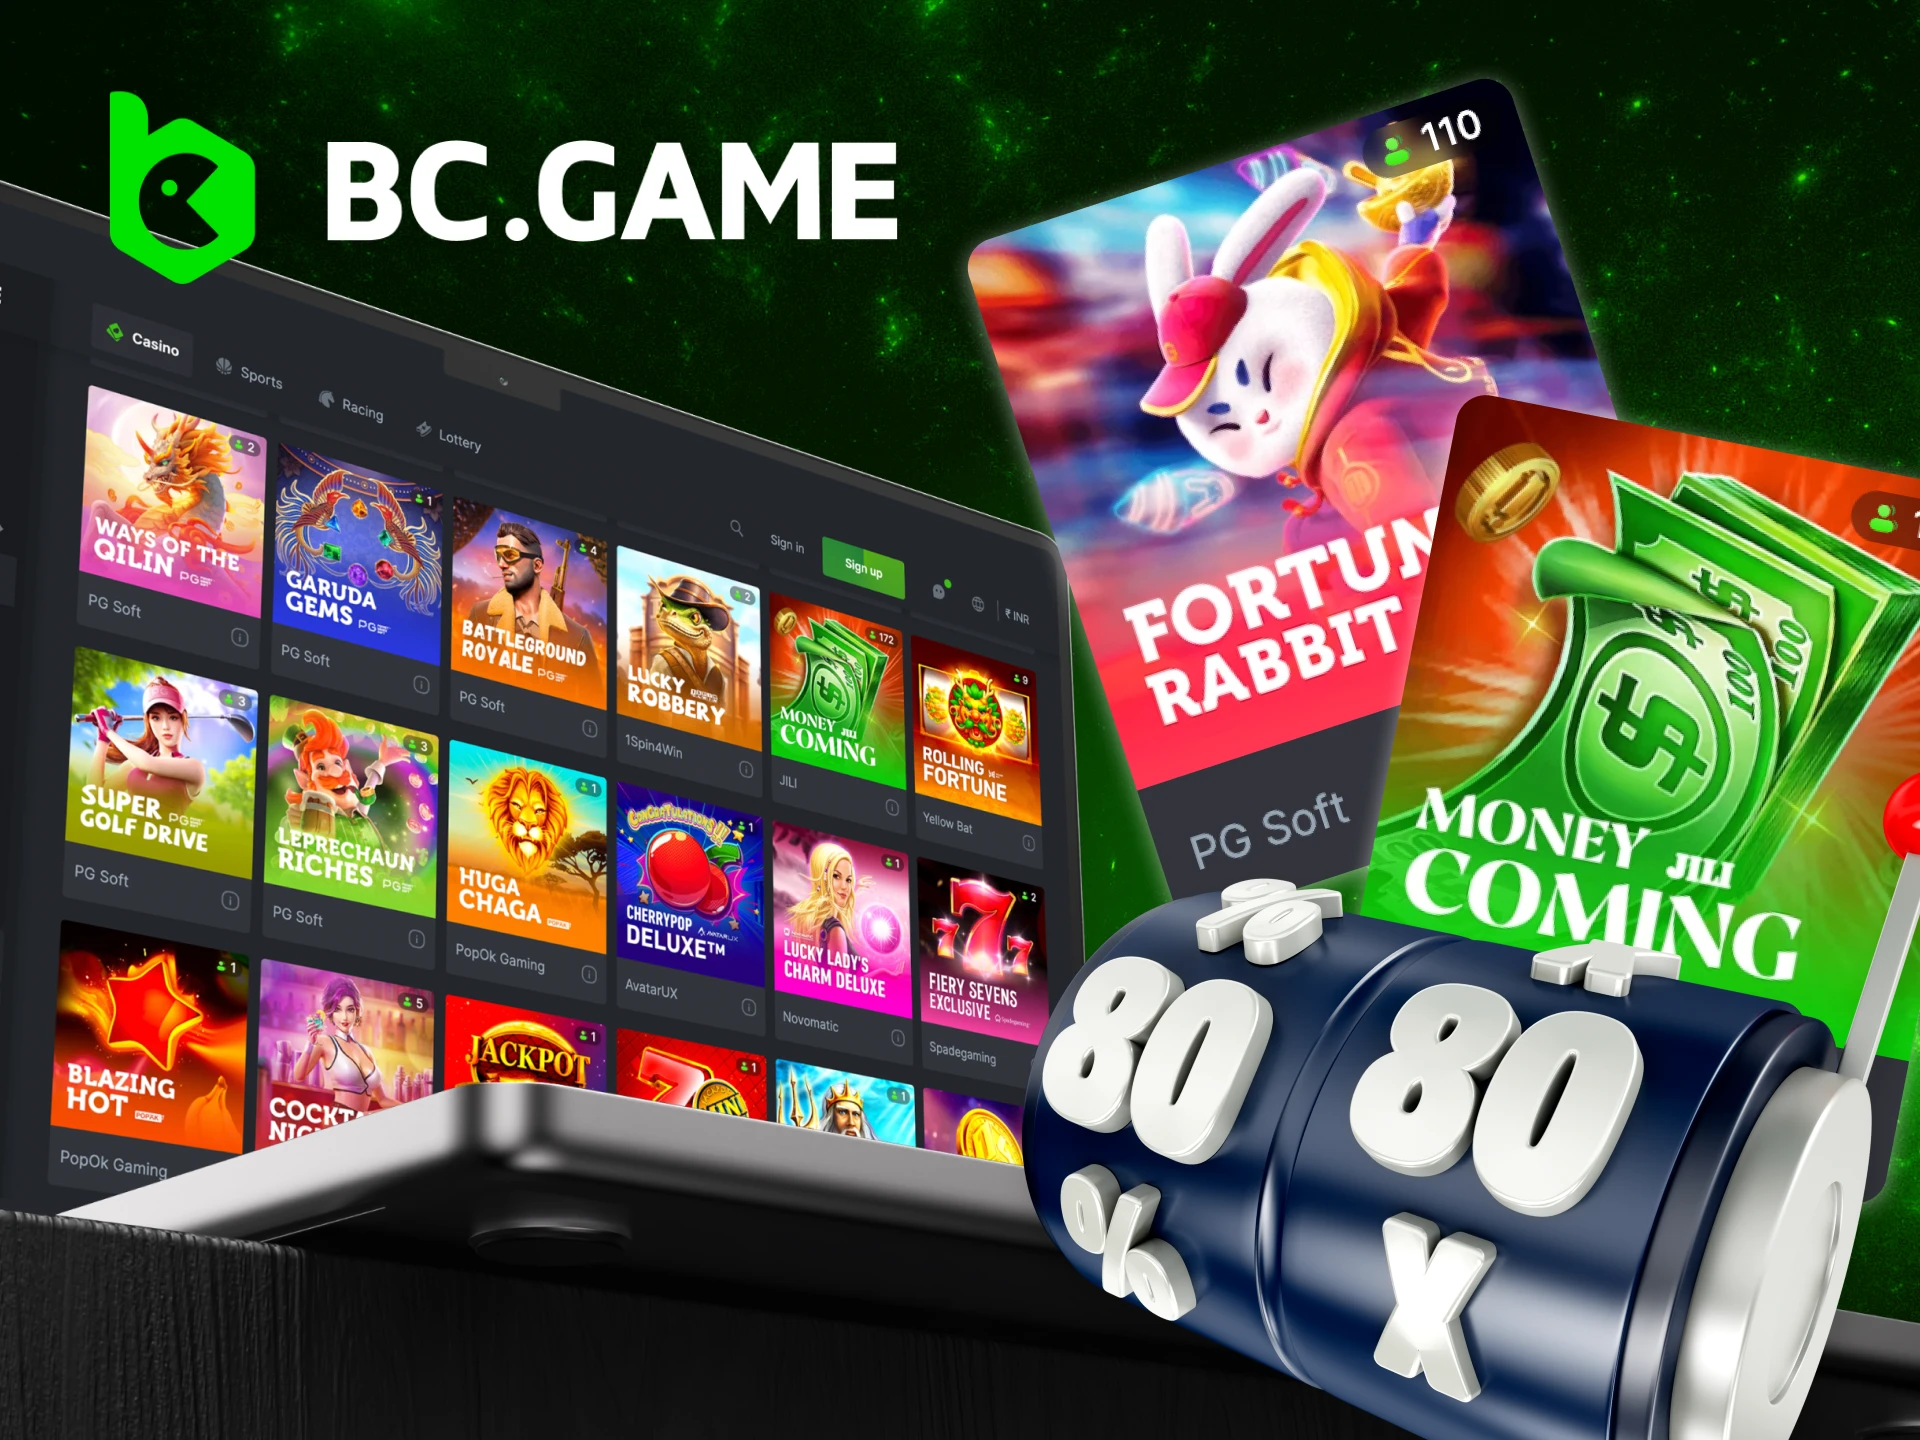 What popular slot games are available on the BC Game online casino website.